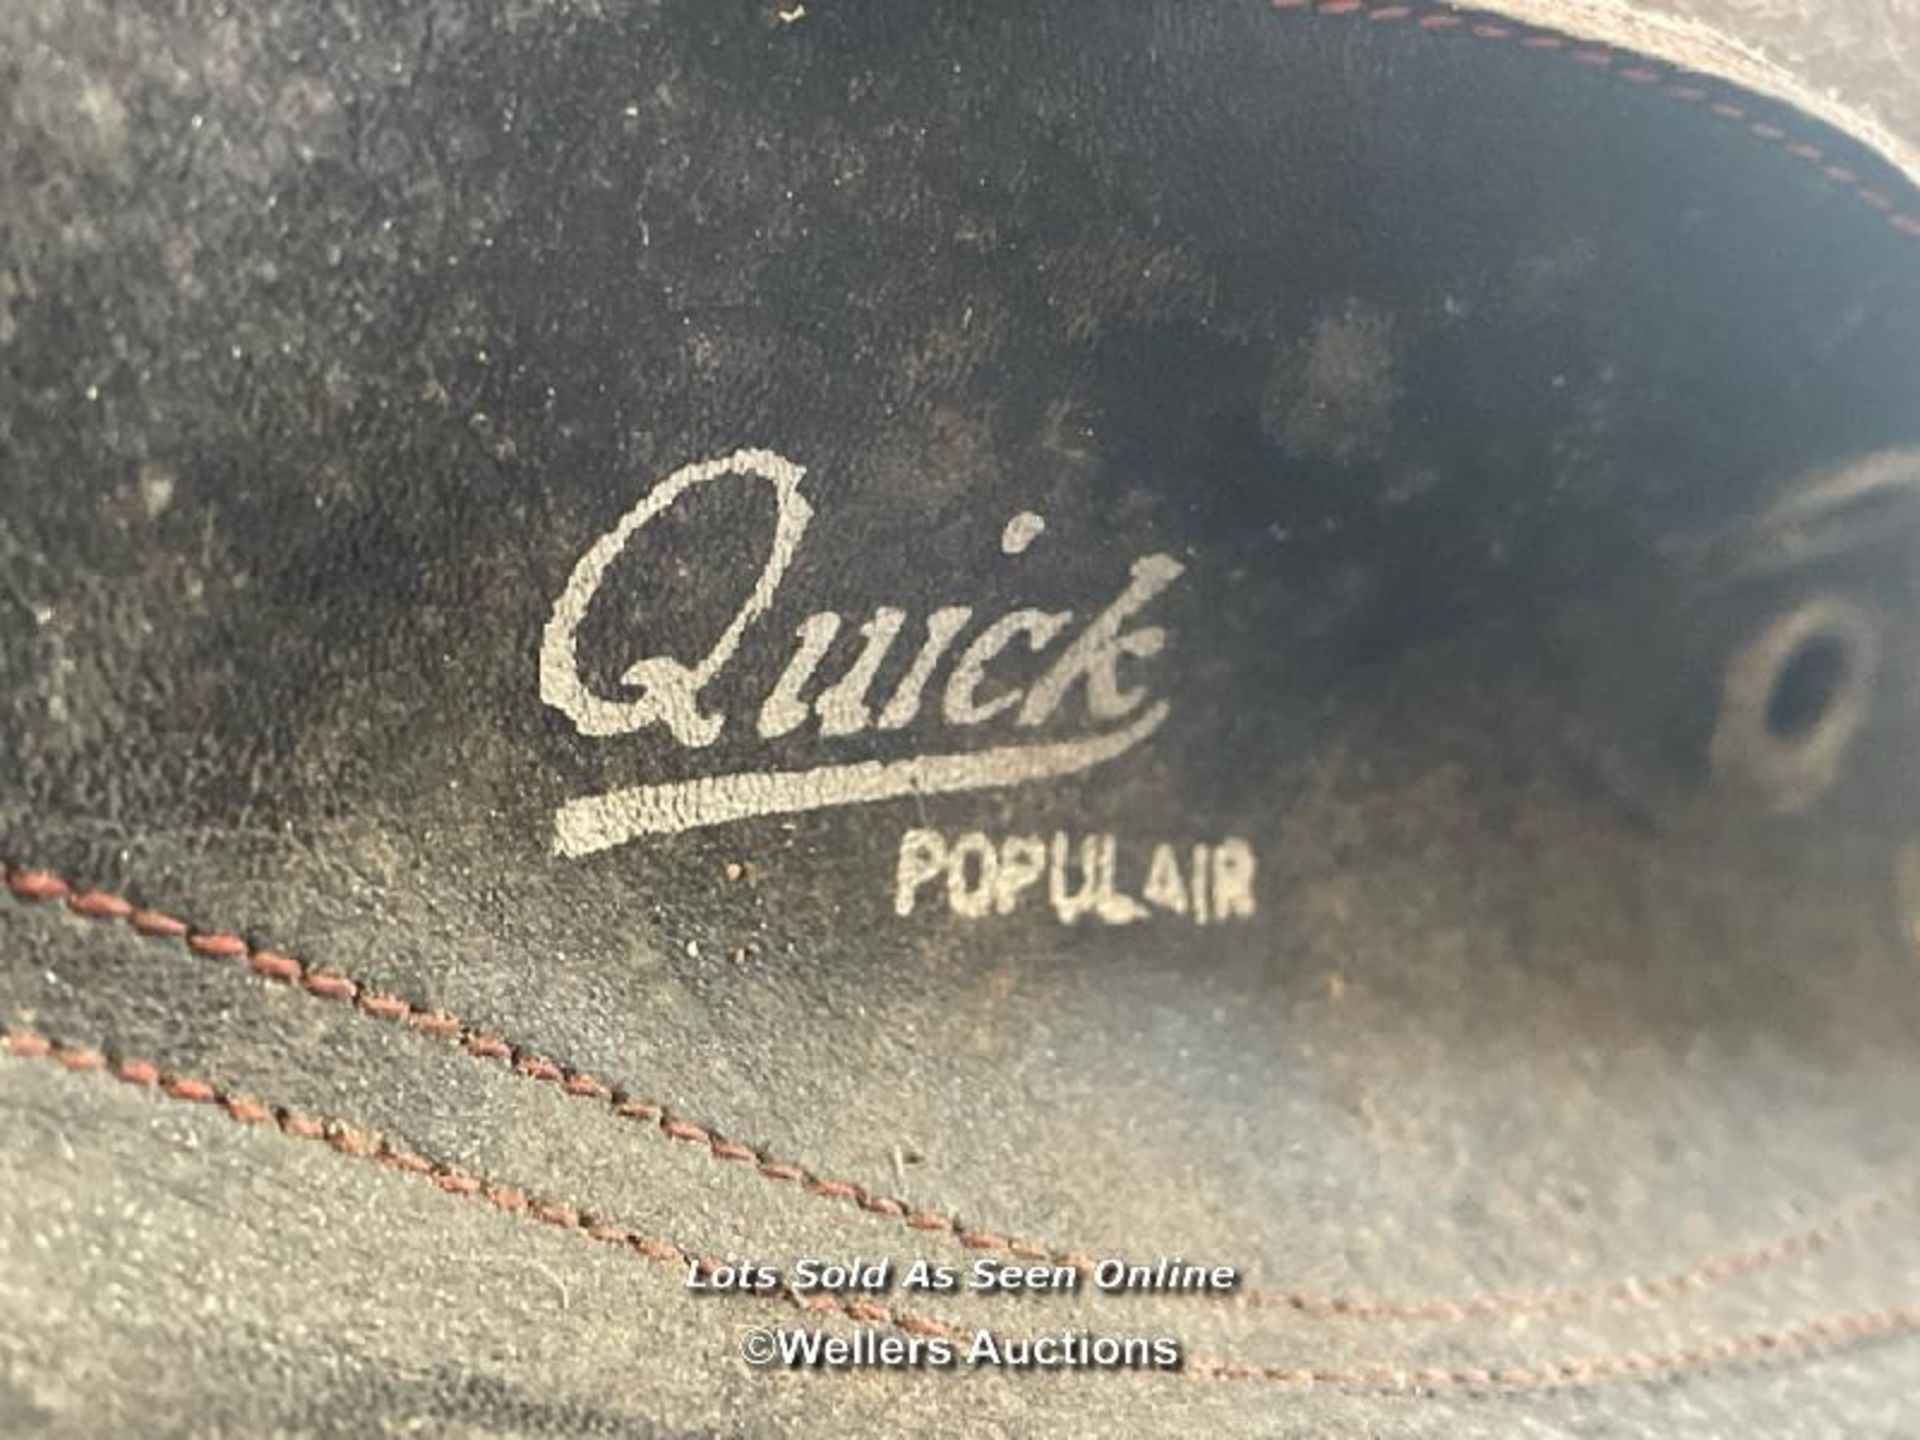 QUICK POPULAIR SPORTS BOOTS, SIZE 46 - Image 2 of 5